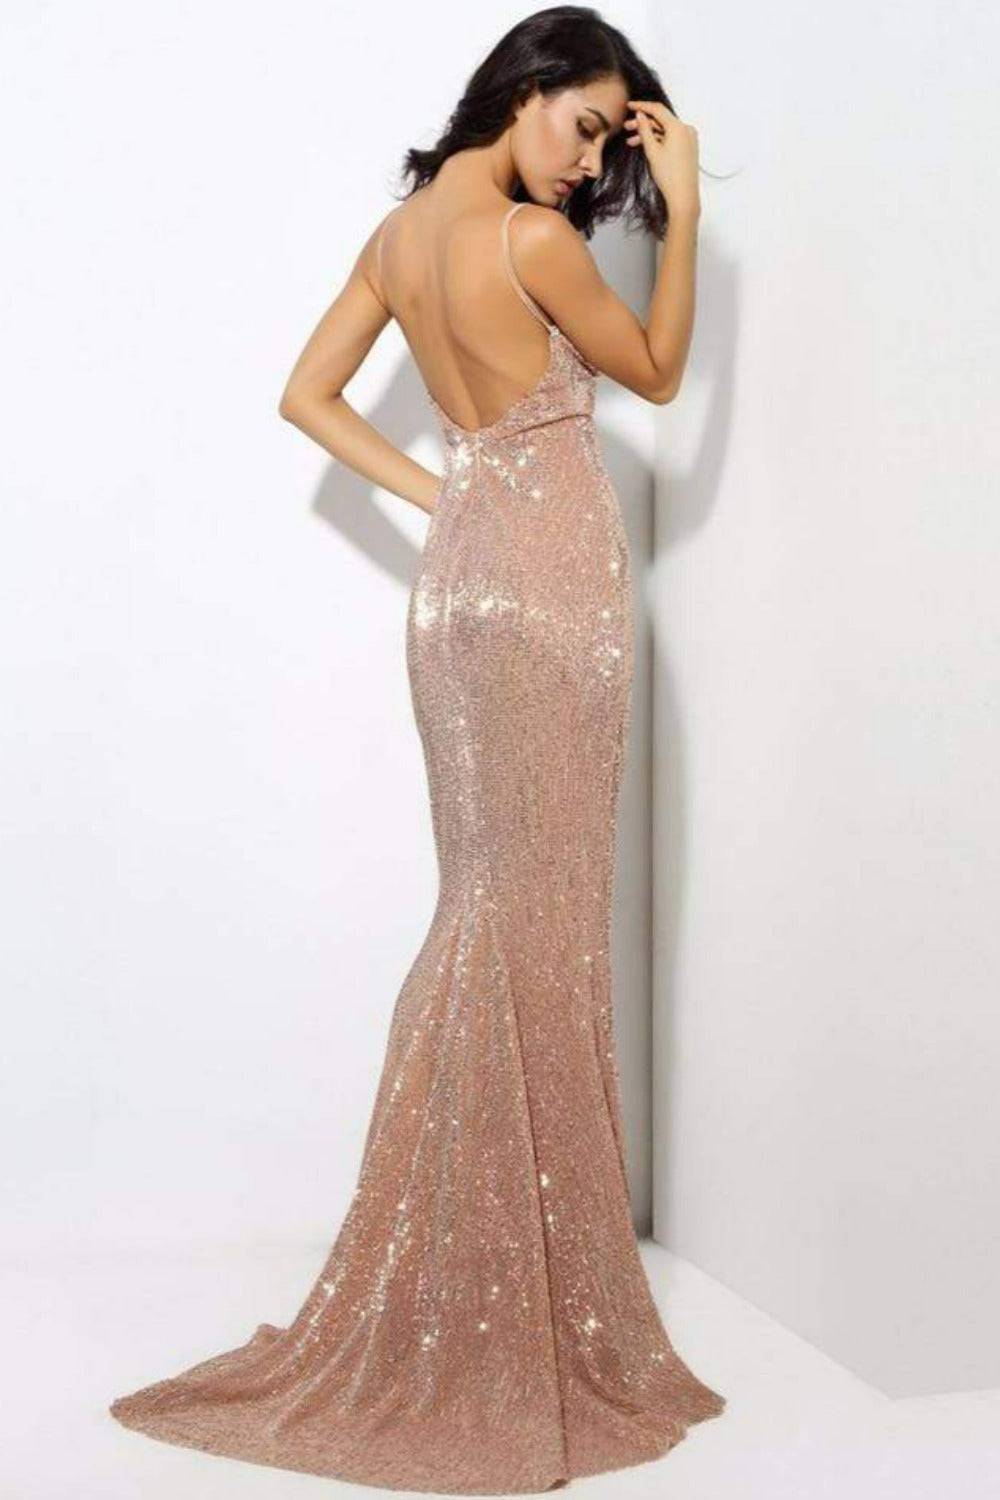 Sequin Backless Gold Maxi Dress - TGC Boutique - Evening Gown